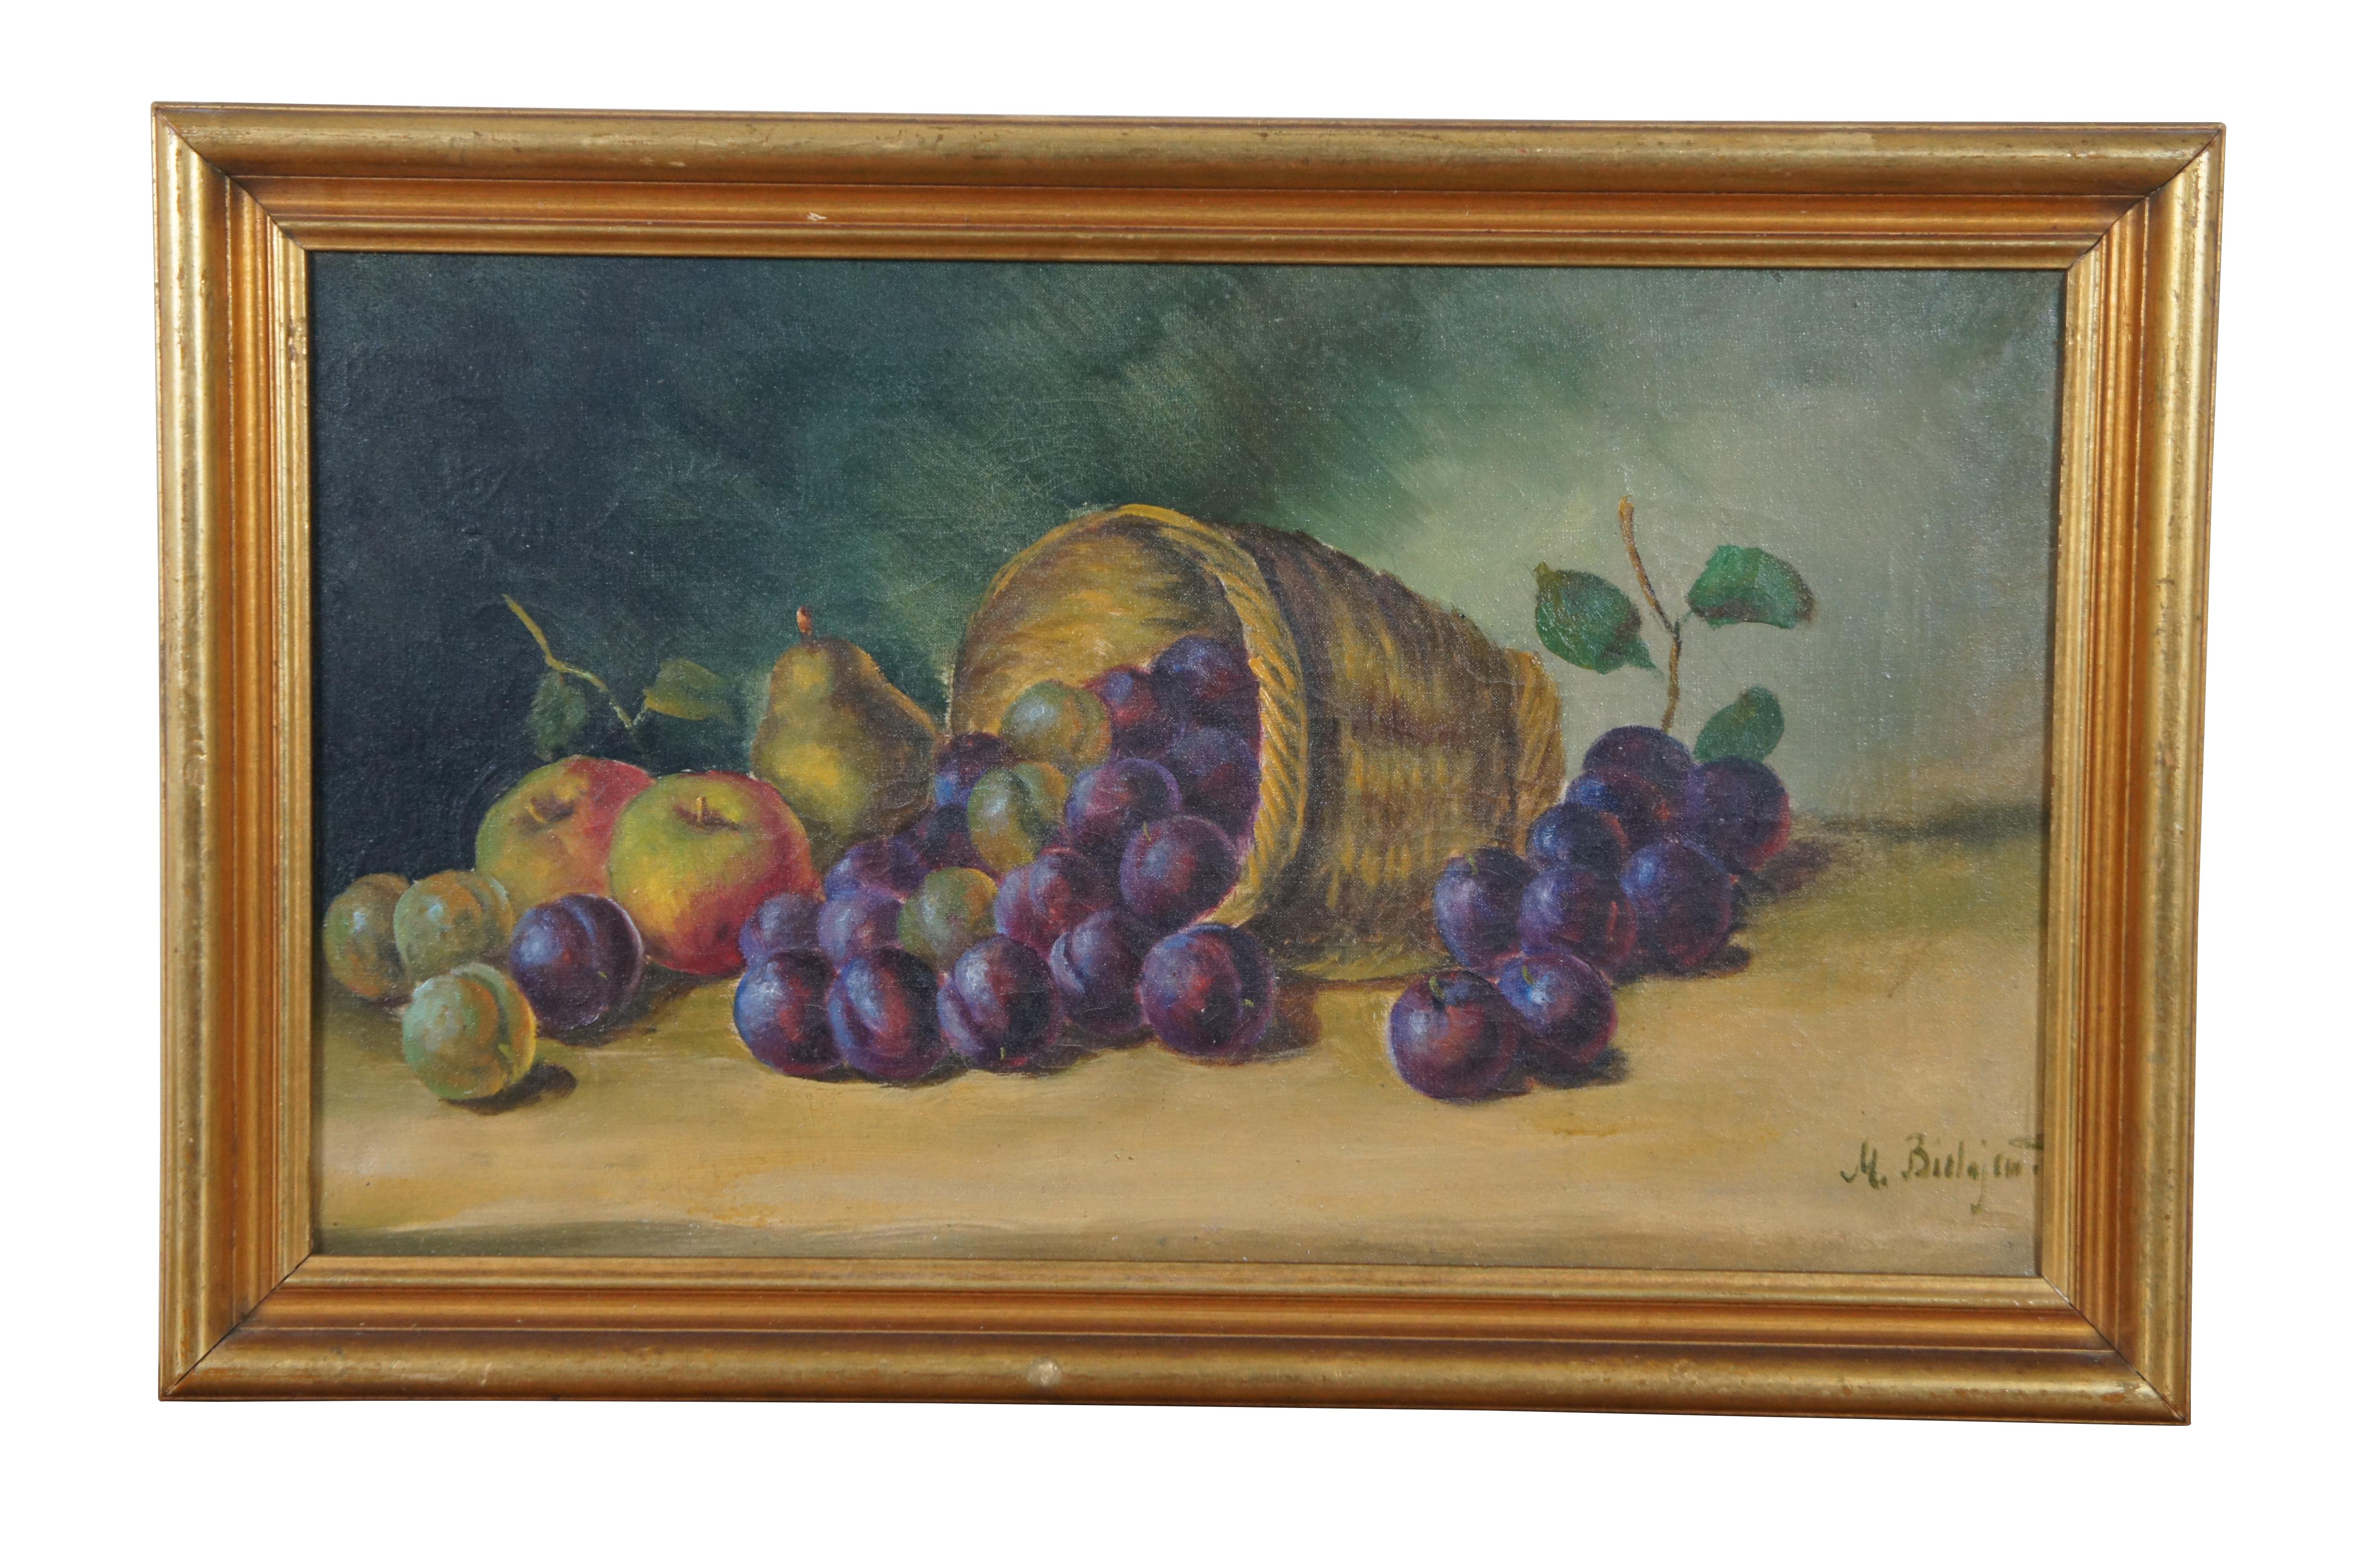 Pair of antique oil on canvas still life paintings showing a a variety of fruits. Signed in lower left by artist (possibly M. Bielajein?), with additional notations on the reverse of the canvas. Measures: 21.5